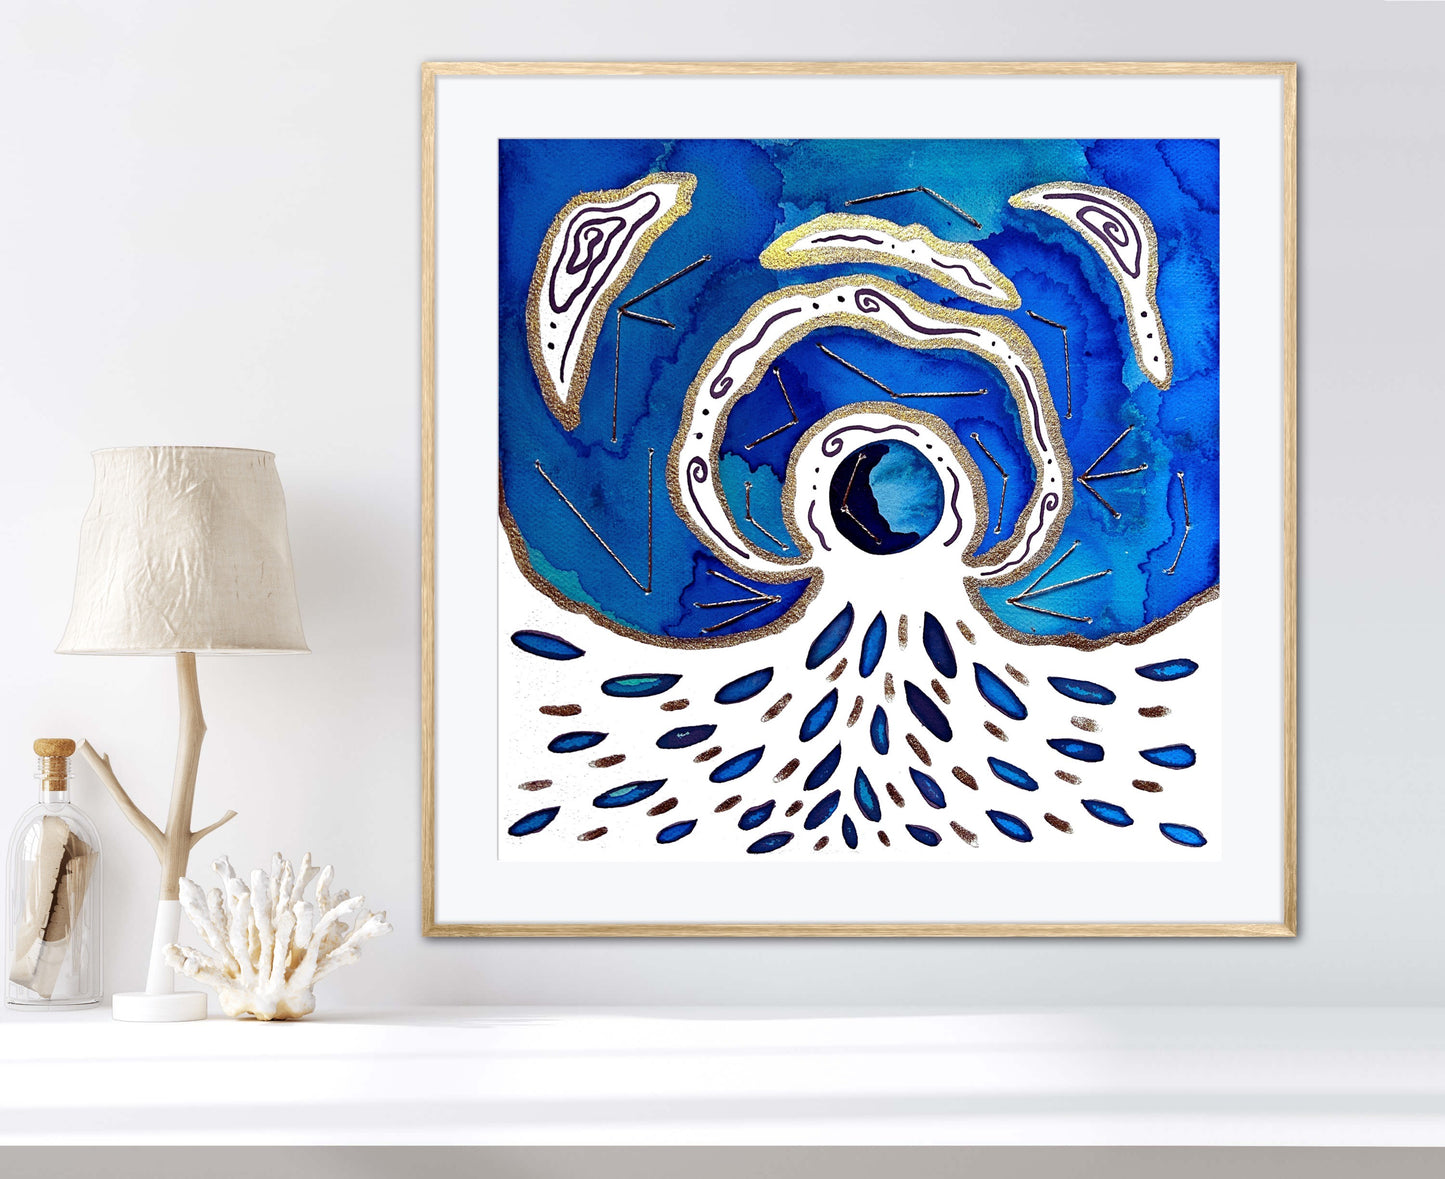 'Life Source' Embellished Art Print - Signed By the Artist - Limited Edition